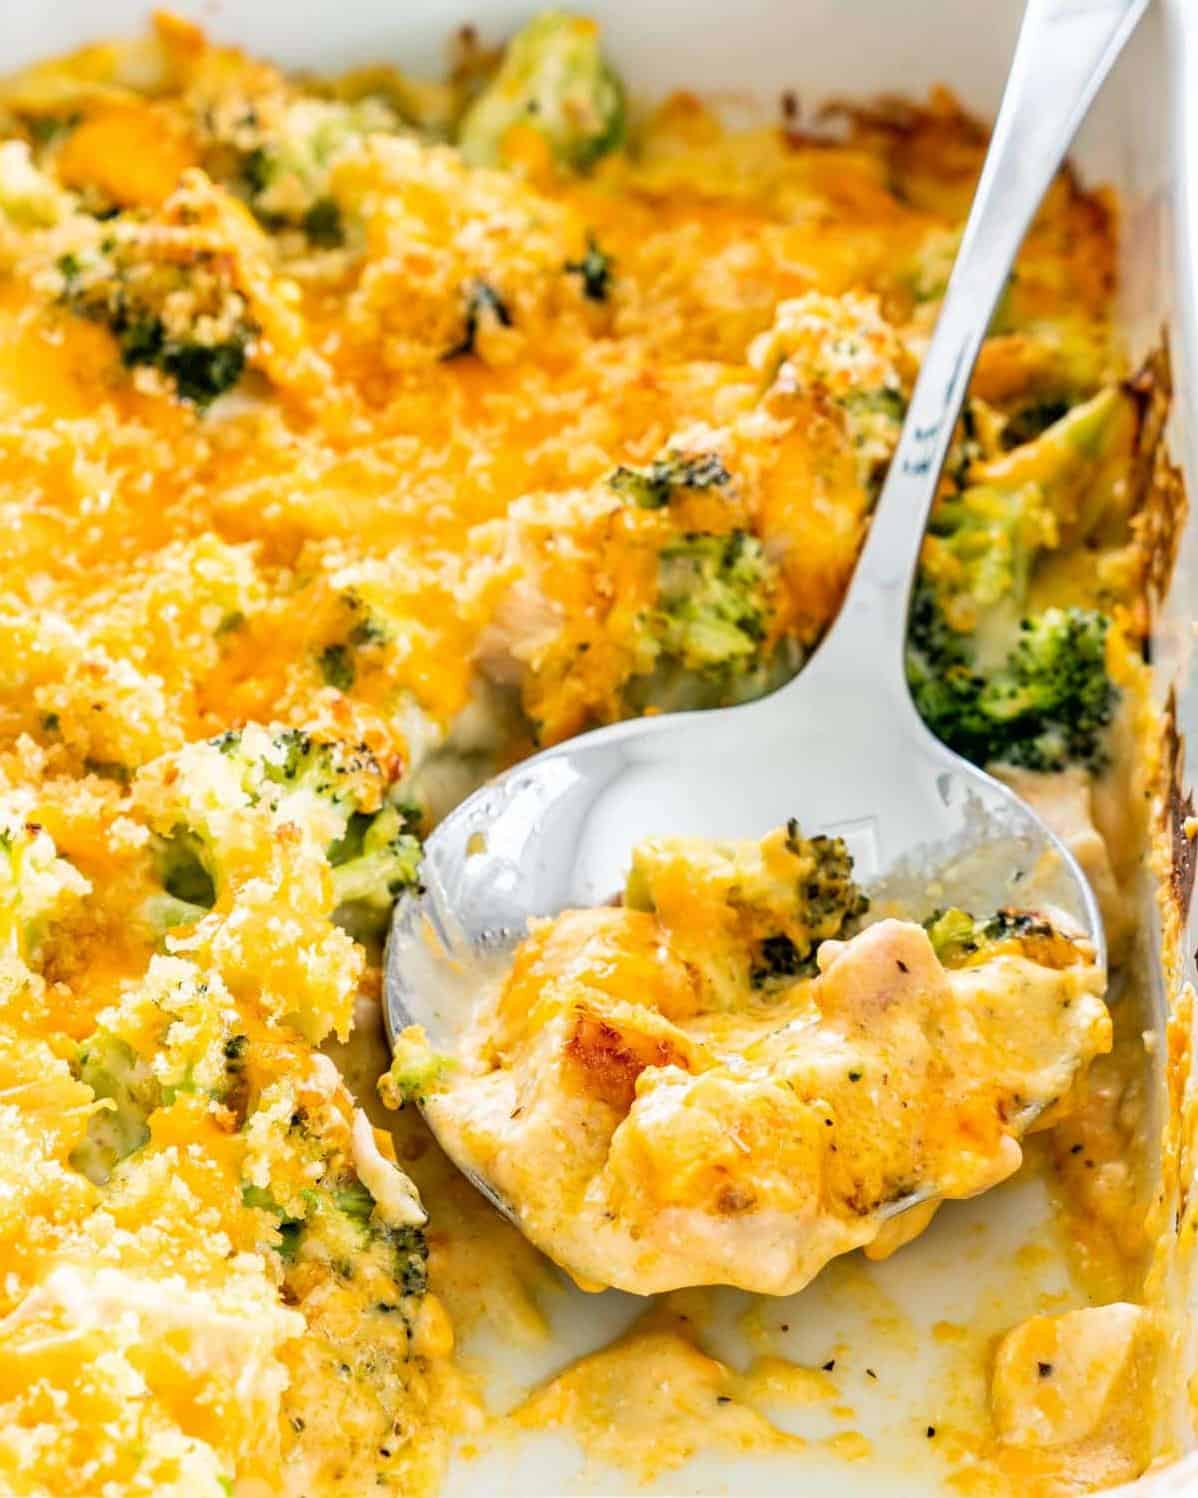  A golden-baked casserole that will make your taste buds sing.